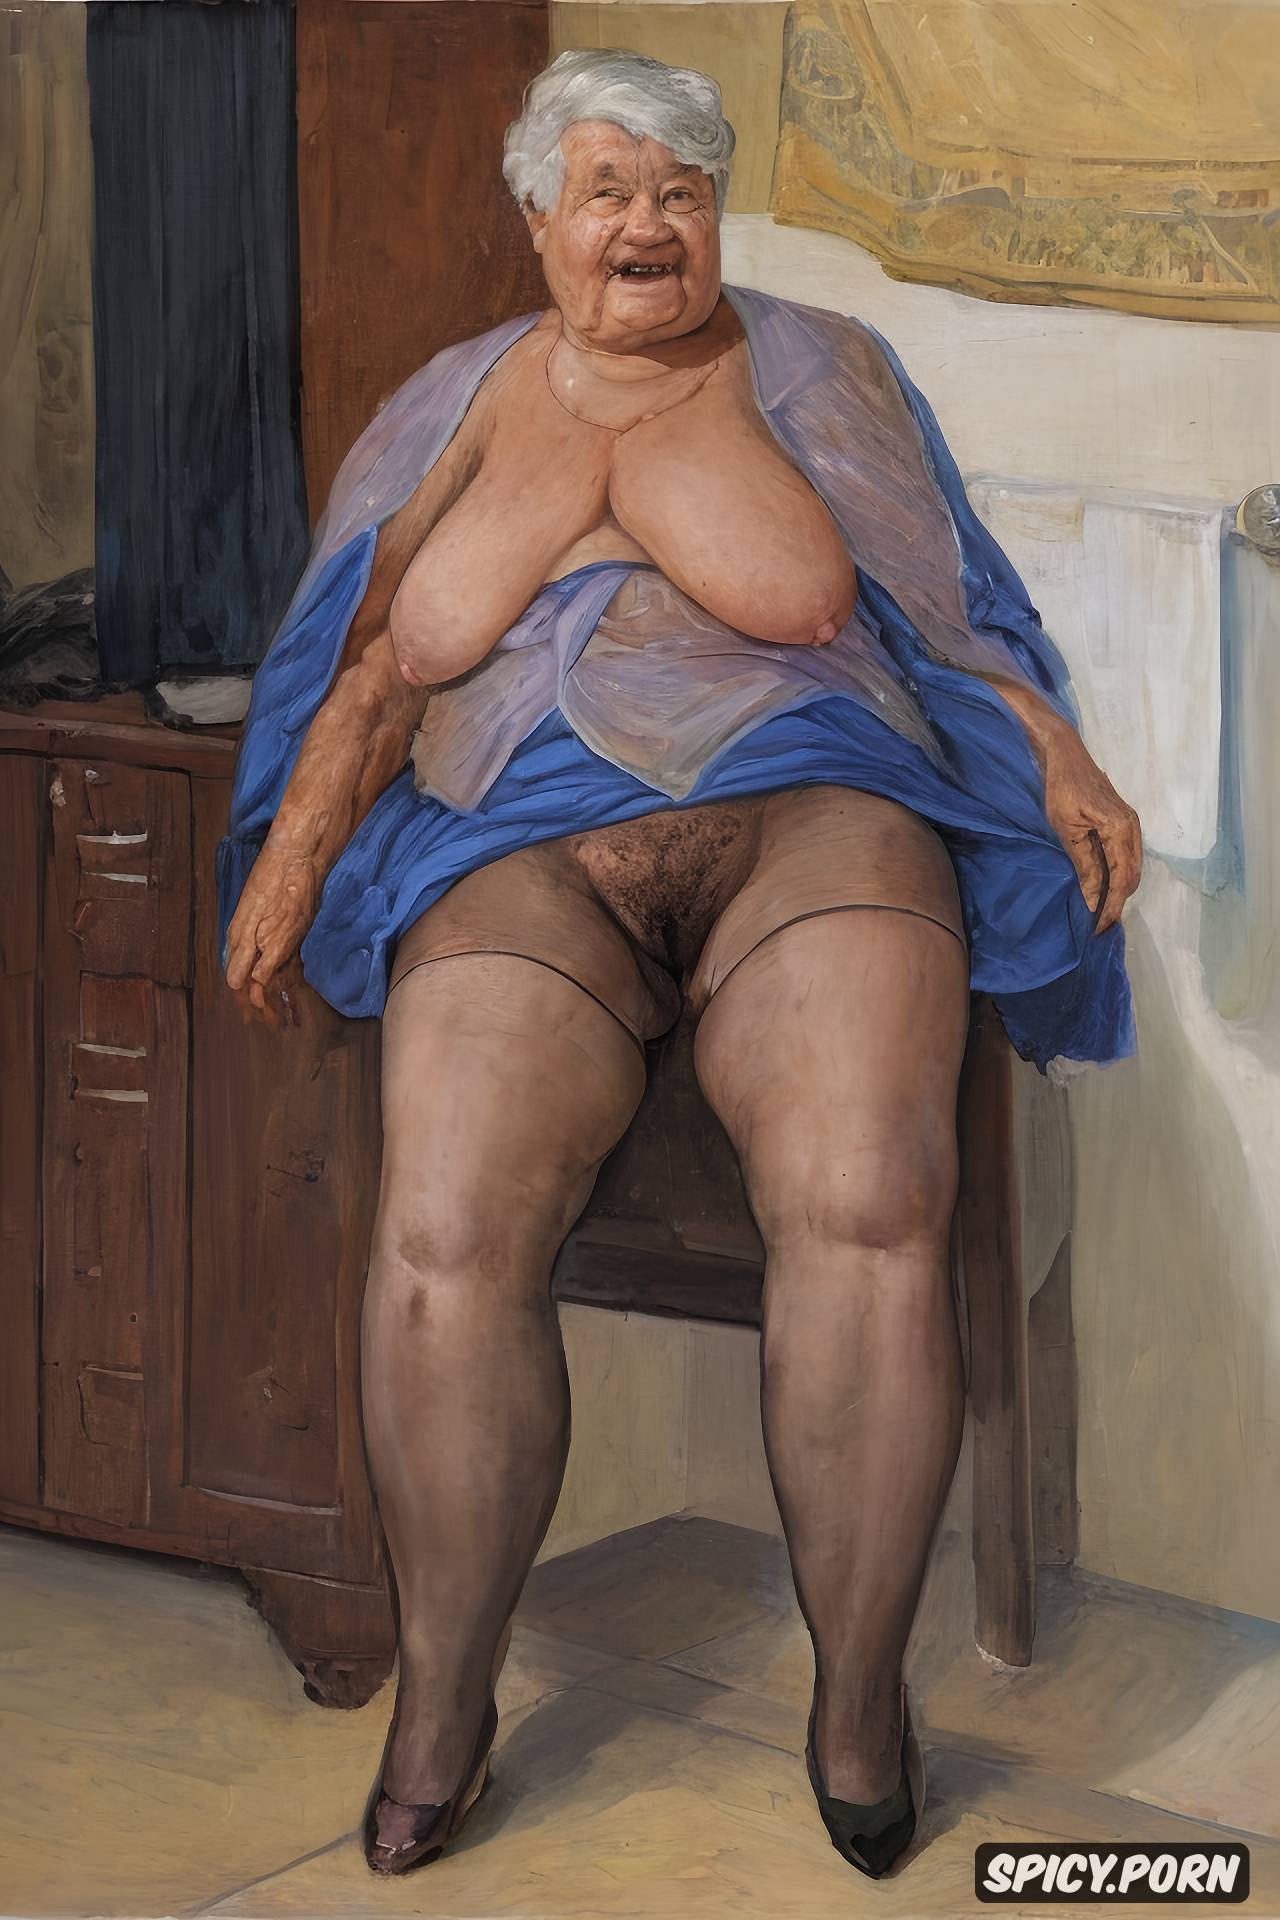 AI Porn: the very old fat grandmother has nude pussy under her skirt